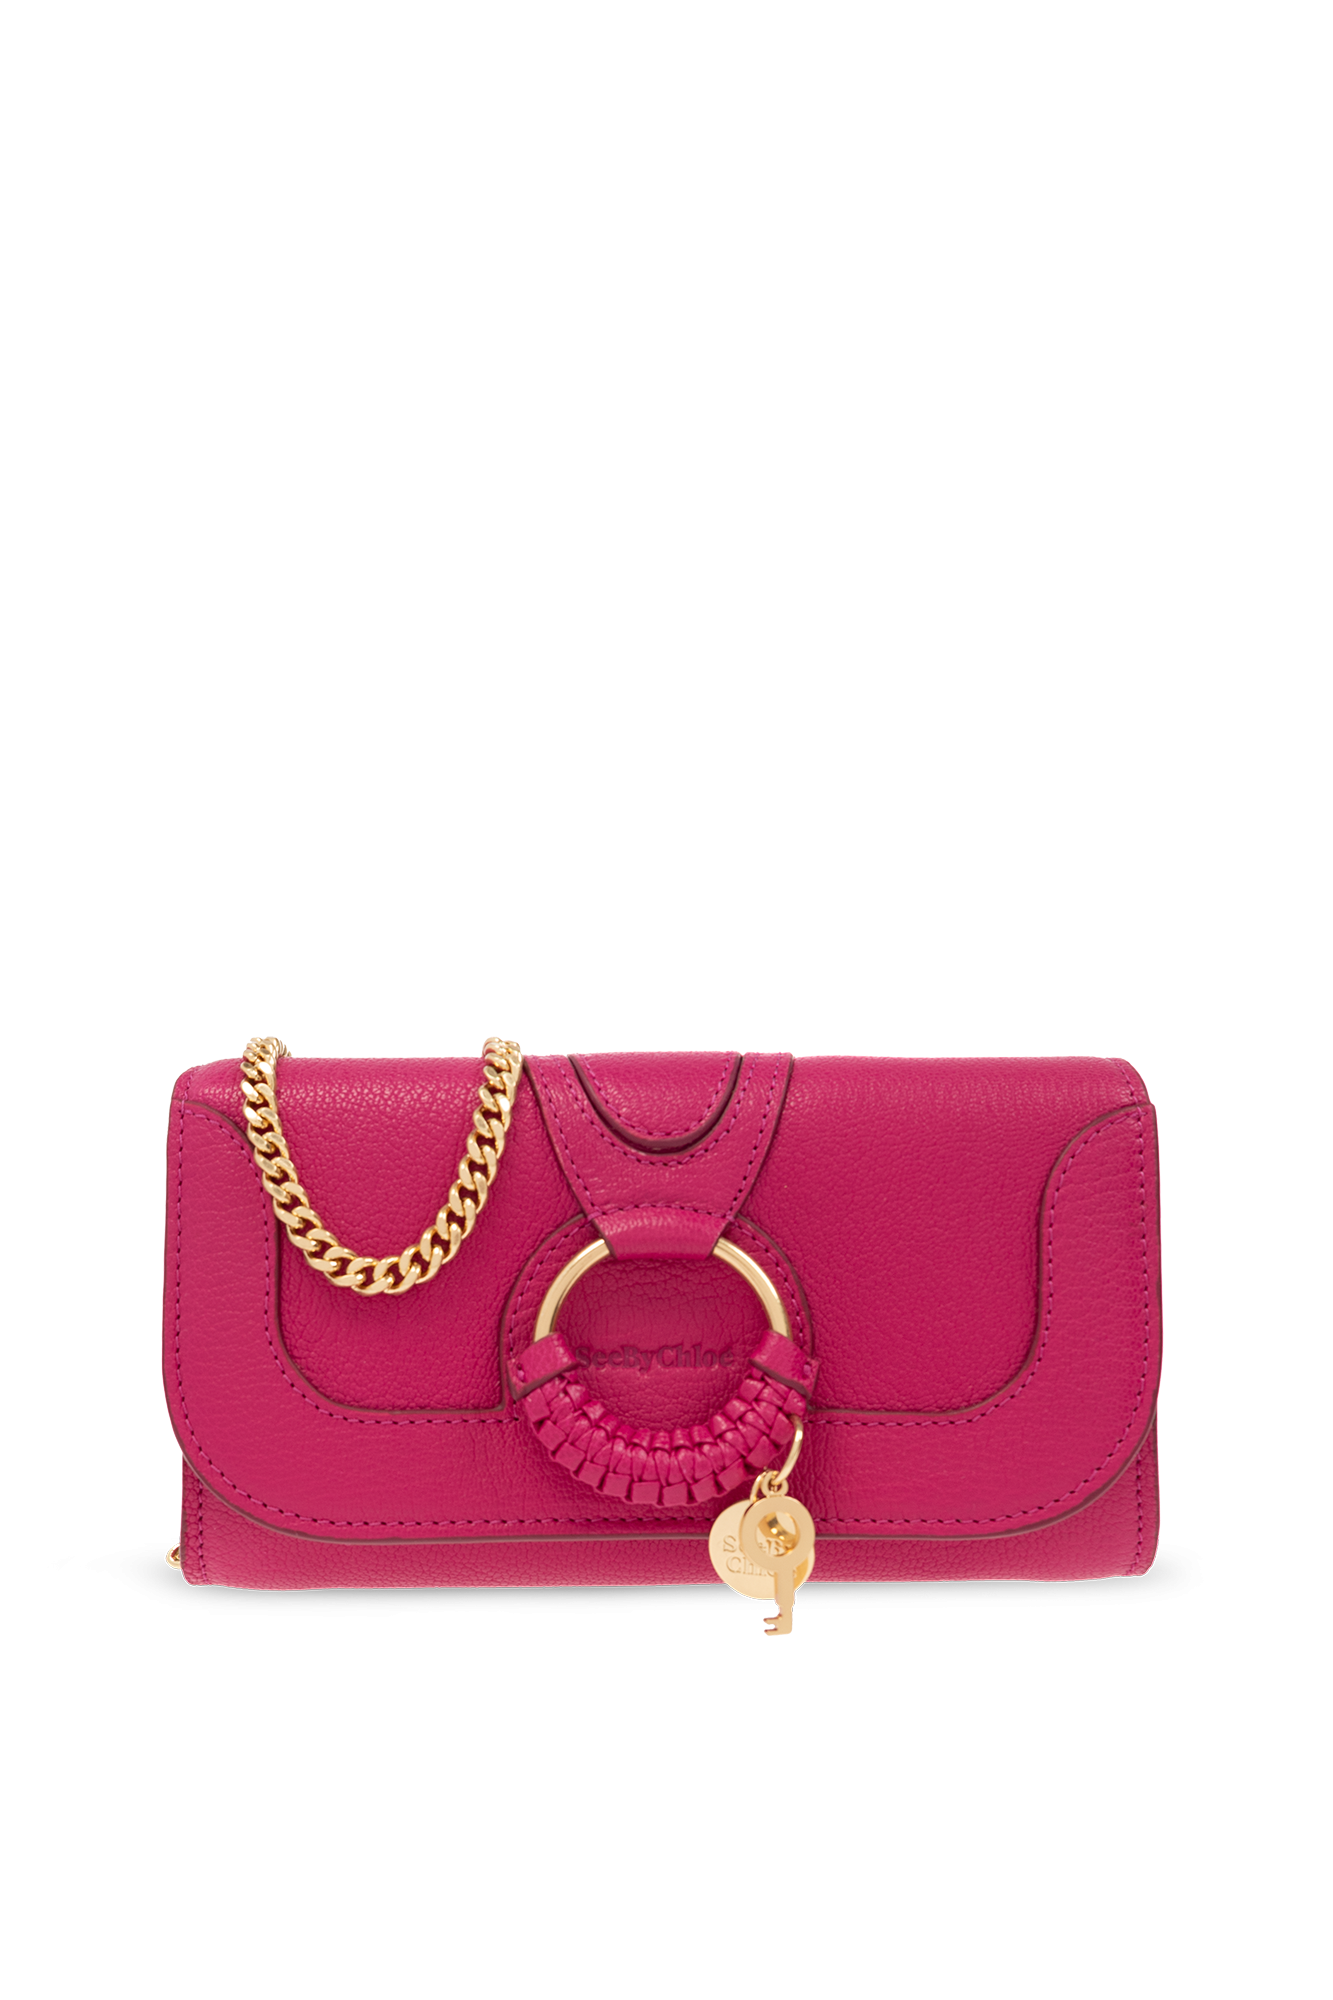 REDValentino RED CHAIN WALLET - Wallet for Women